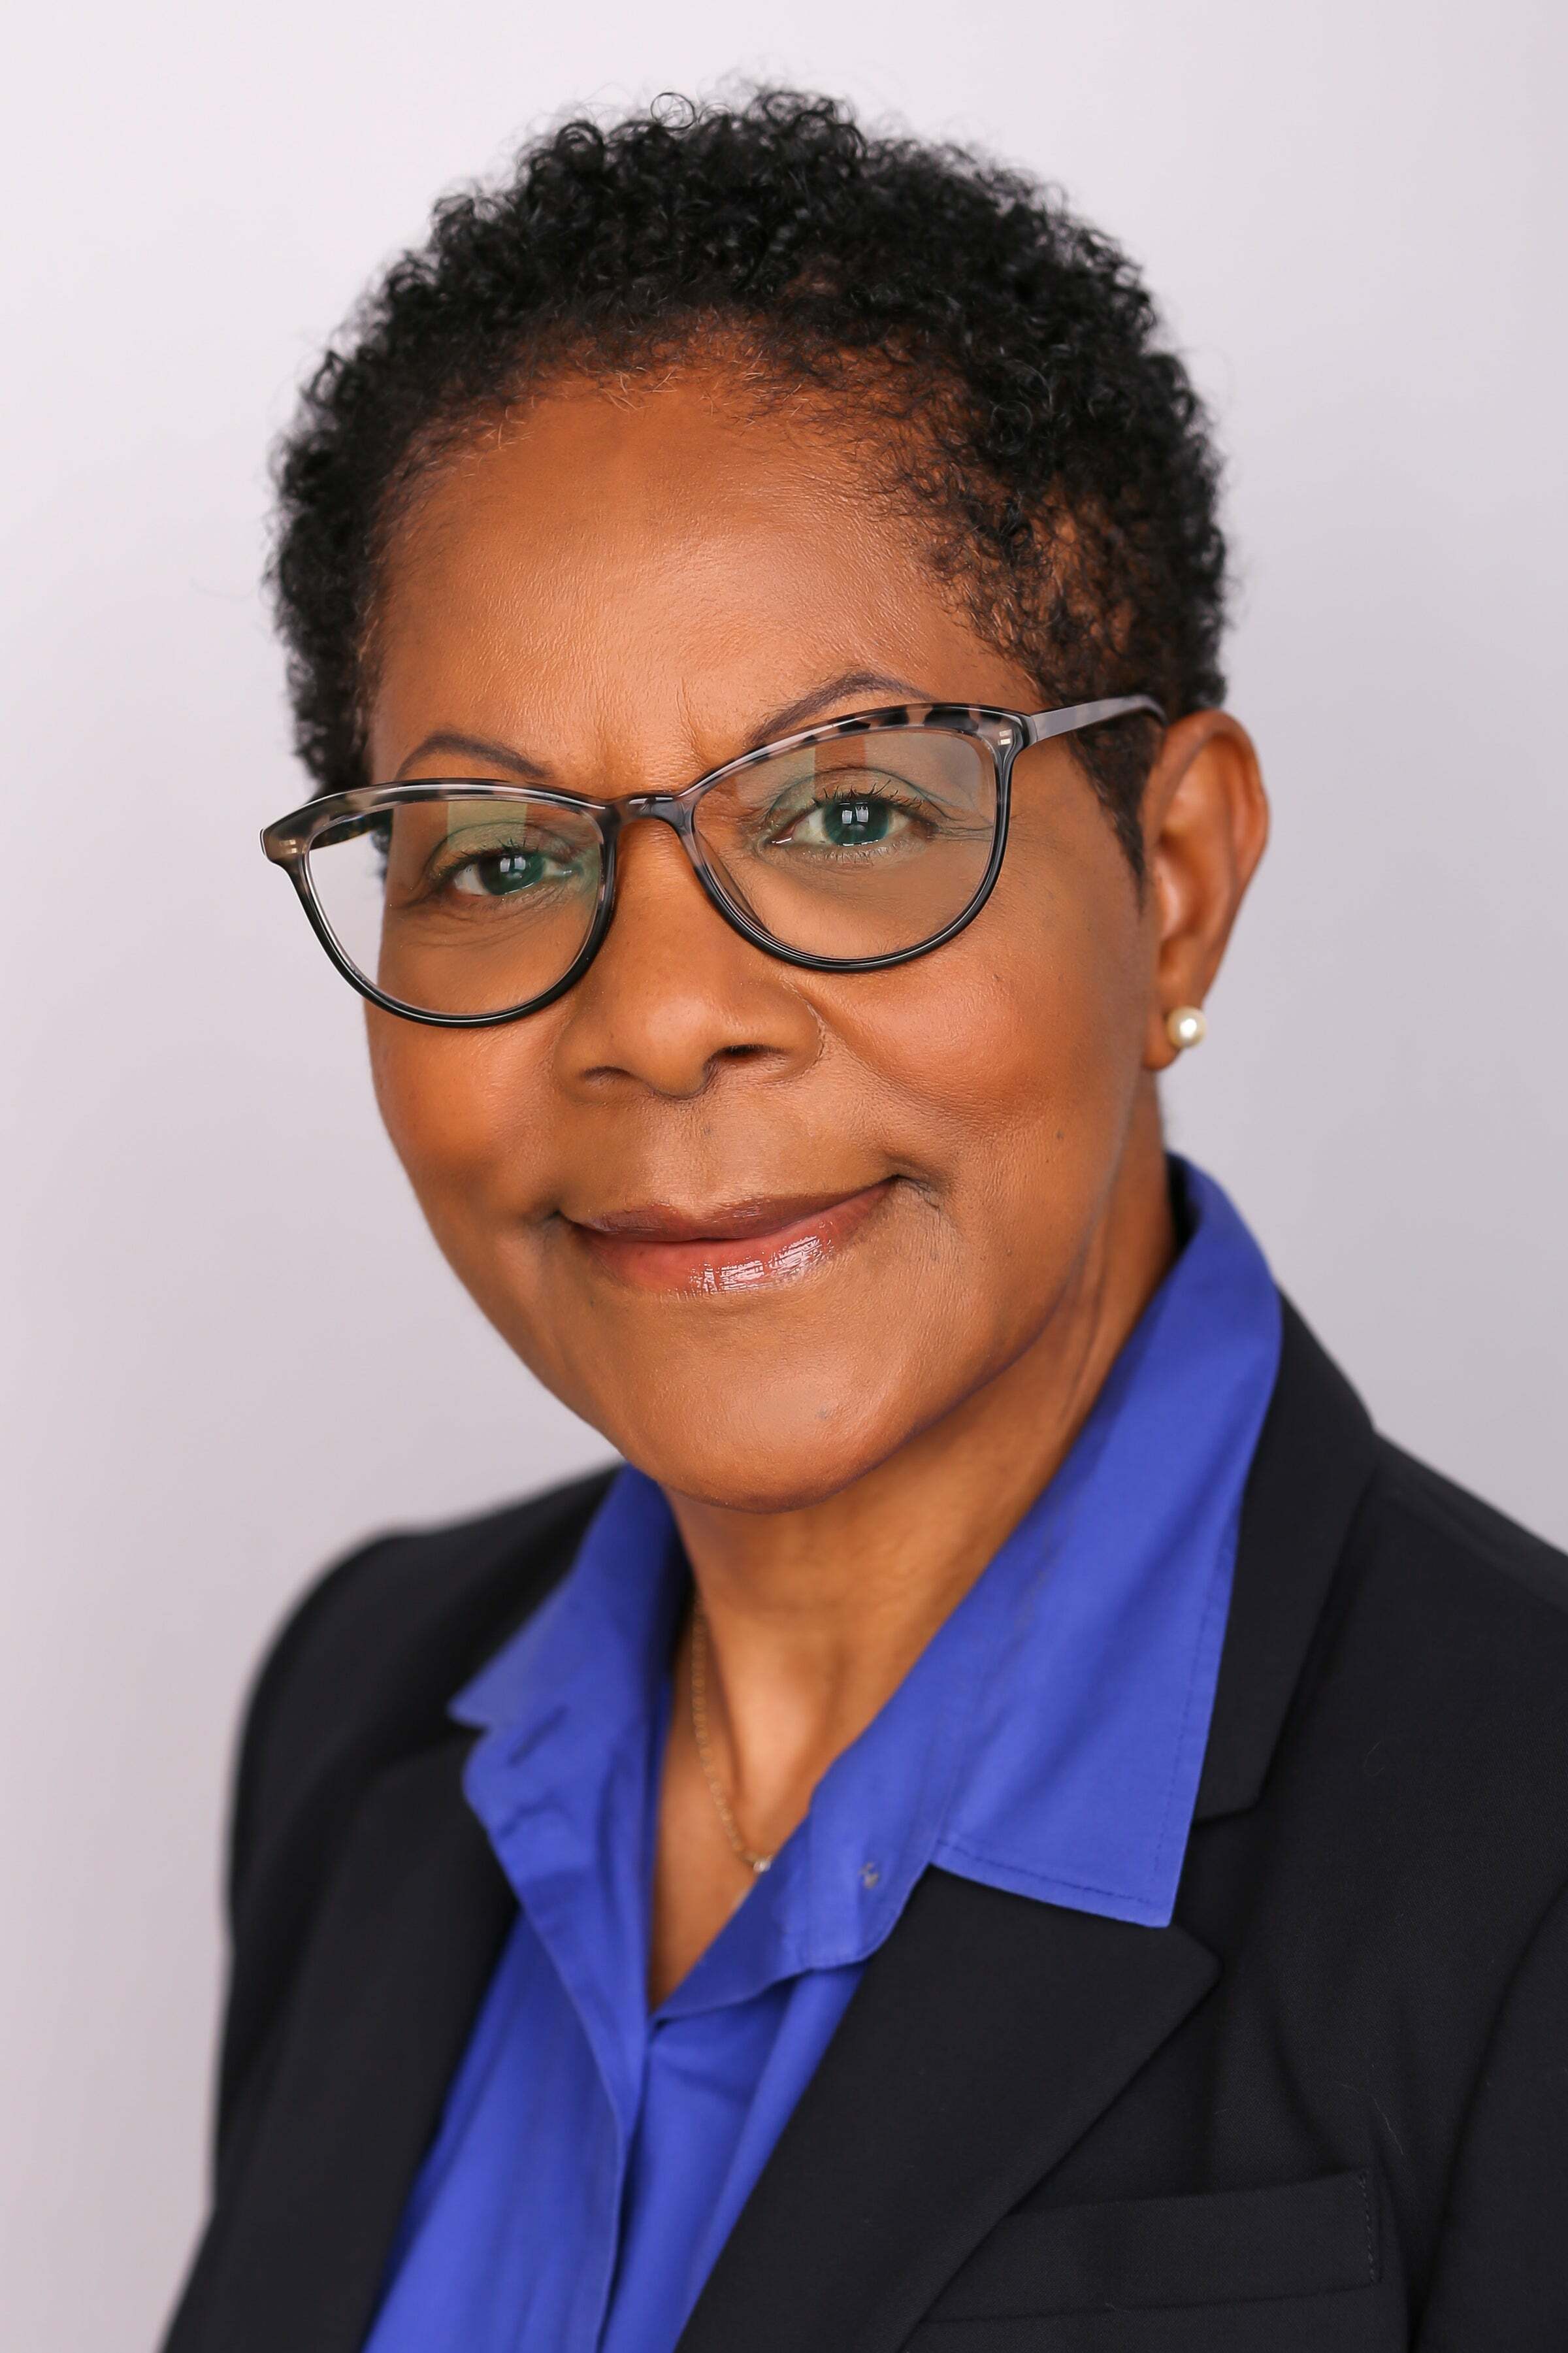 Cynthia Harris, Real Estate Salesperson in Oakland, Reliance Partners